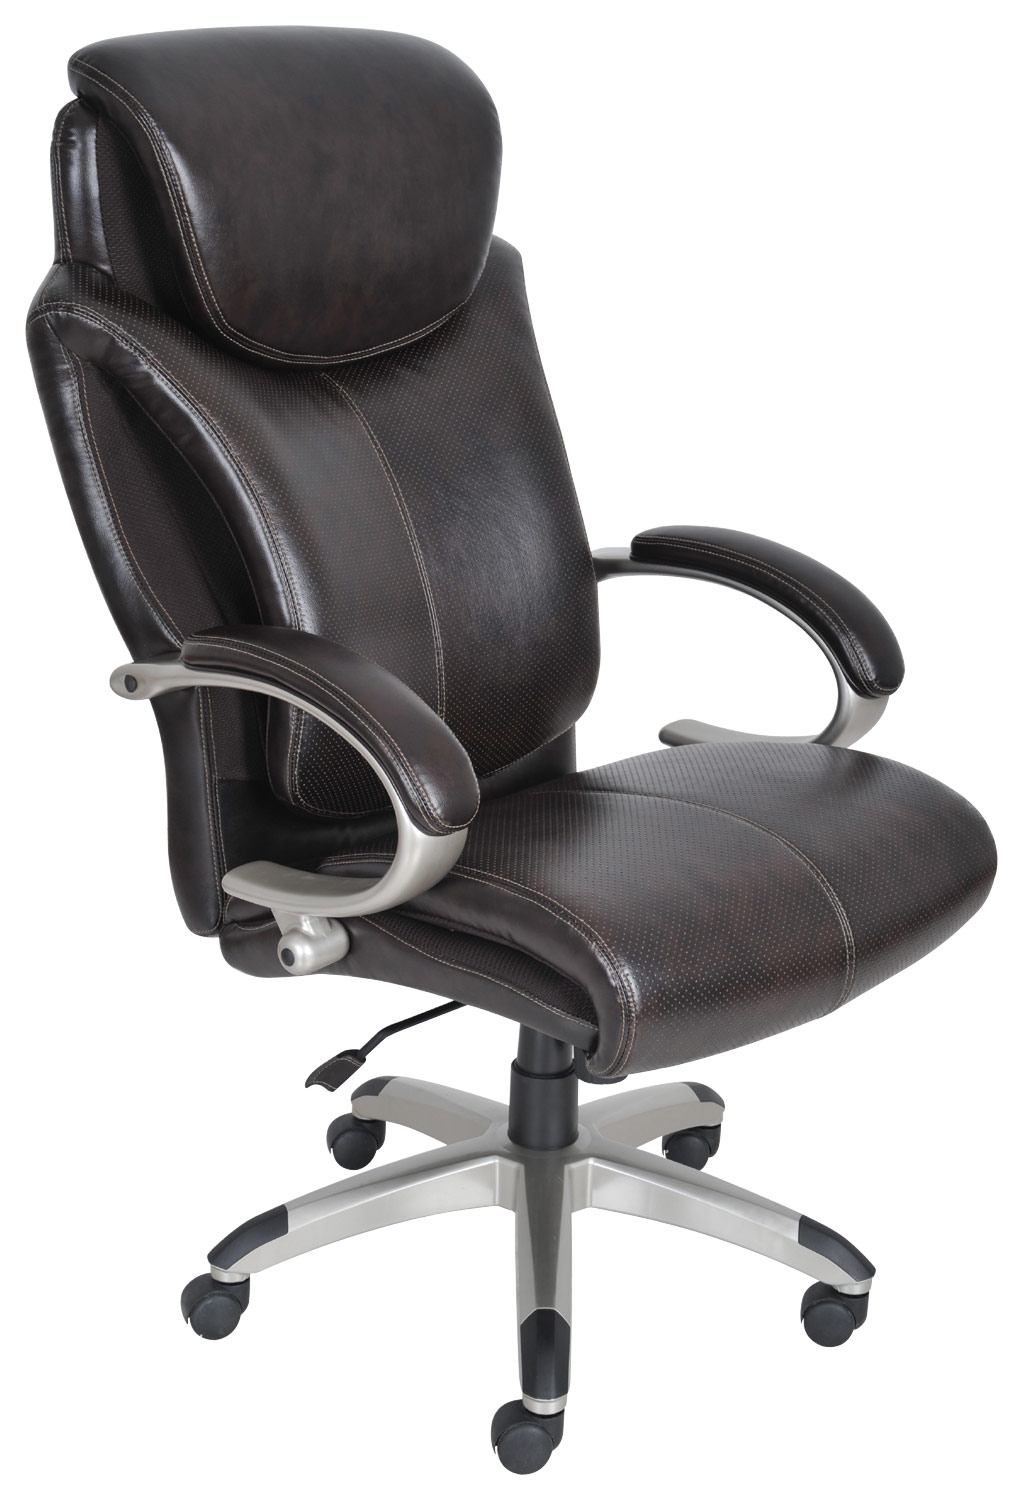 Angle View: Serta Dayton Big and Tall Executive Office Chair with AIR Technology Brown